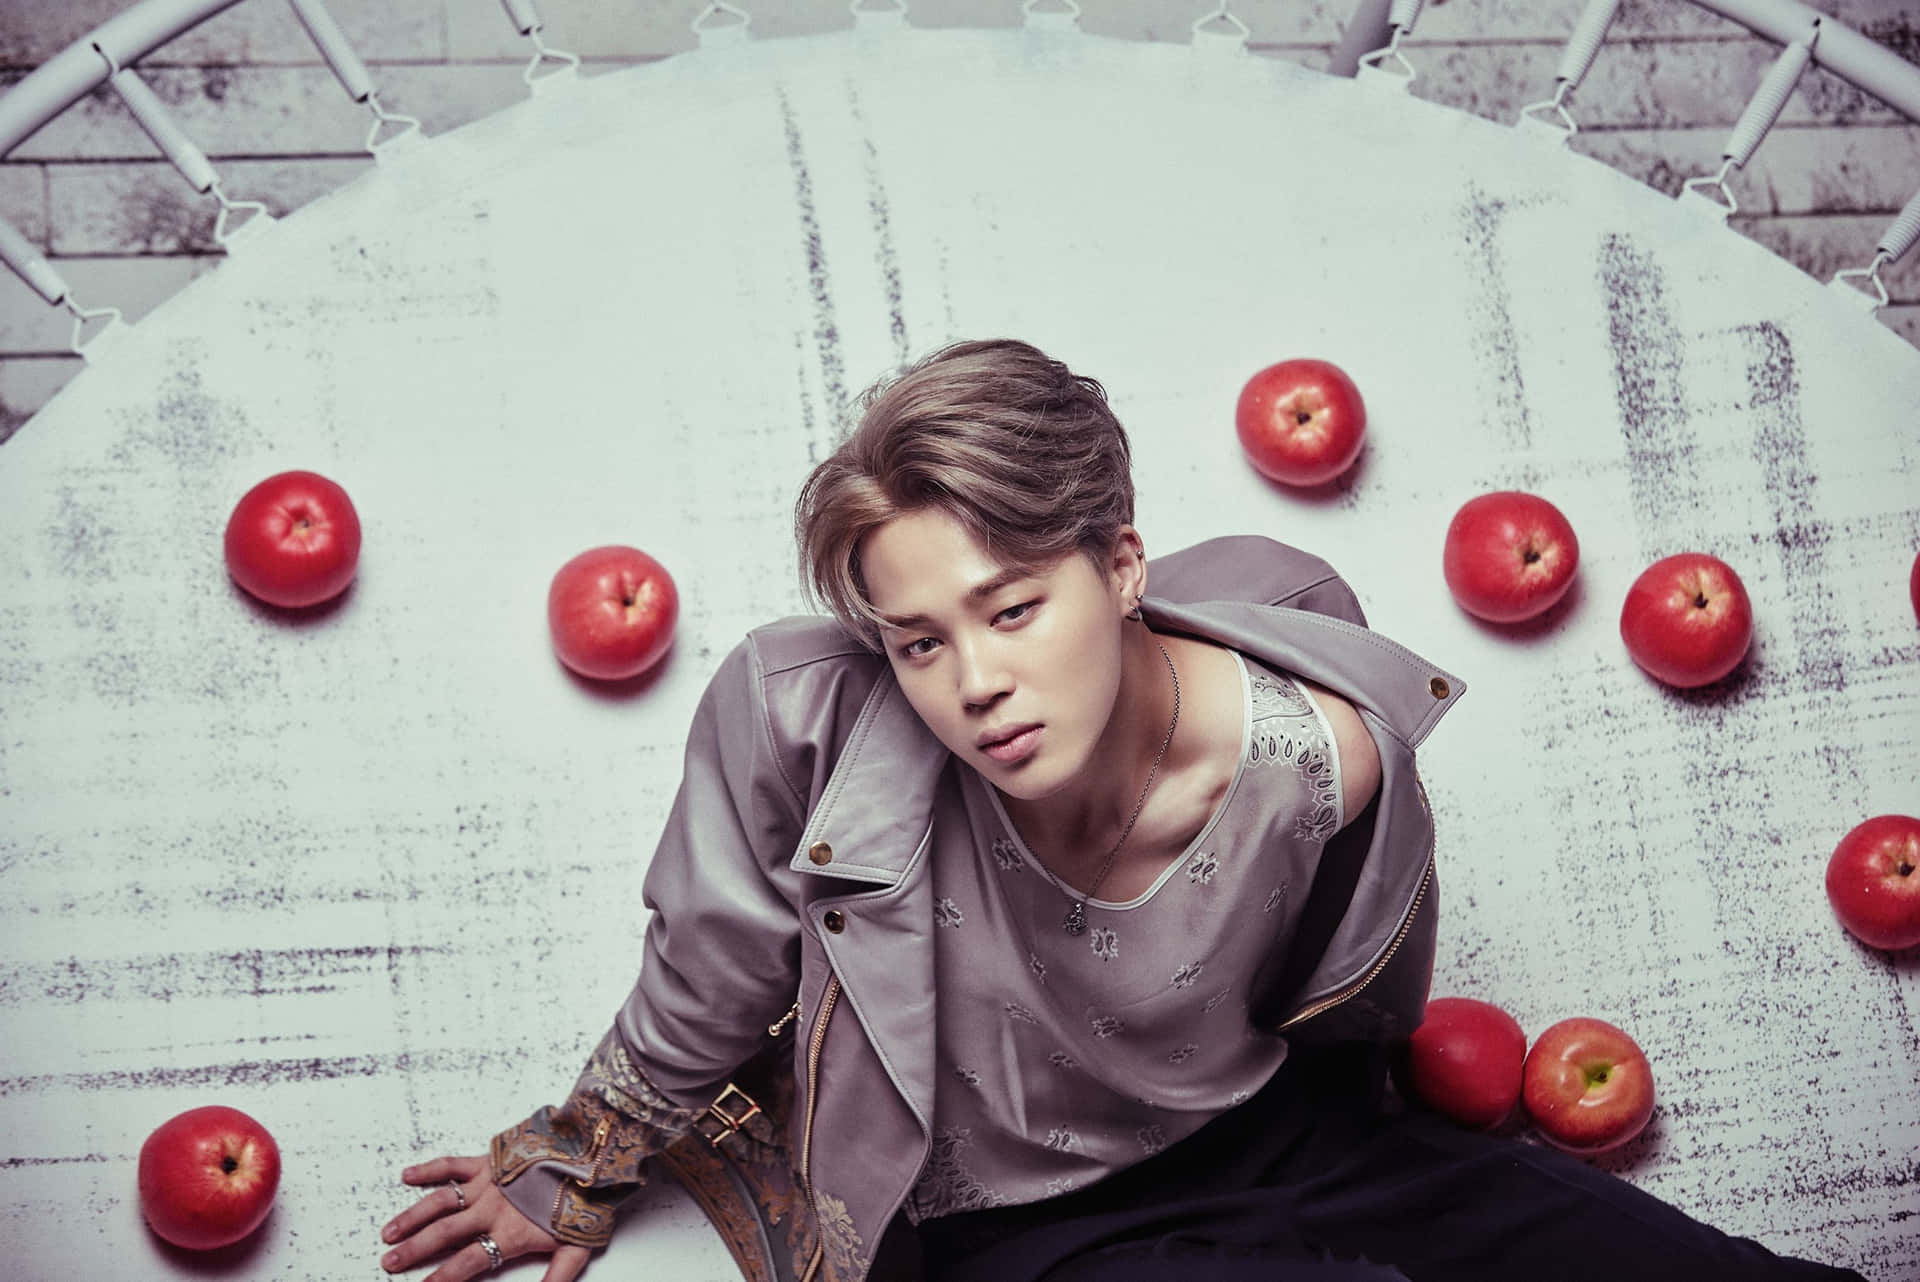 Download Jimin Hd Concept For Blood Sweat And Tears Wallpaper | Wallpapers .com